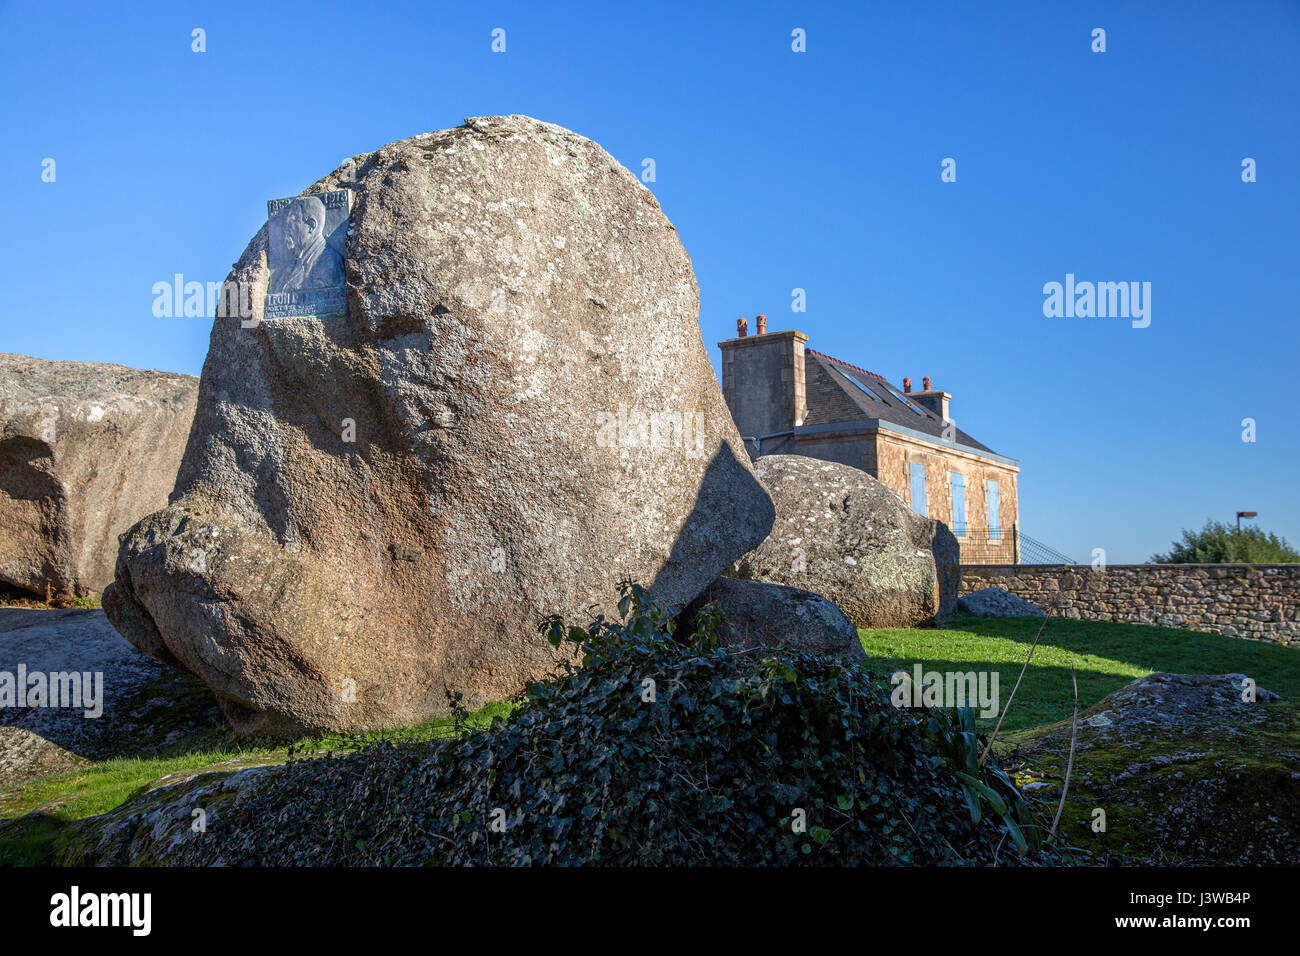 Plaque and boulder monument dedicated to French poet and songwriter Leon Durocher in Tregastel, Brittany, France - Louis H. Nicot/1937 Stock Photo